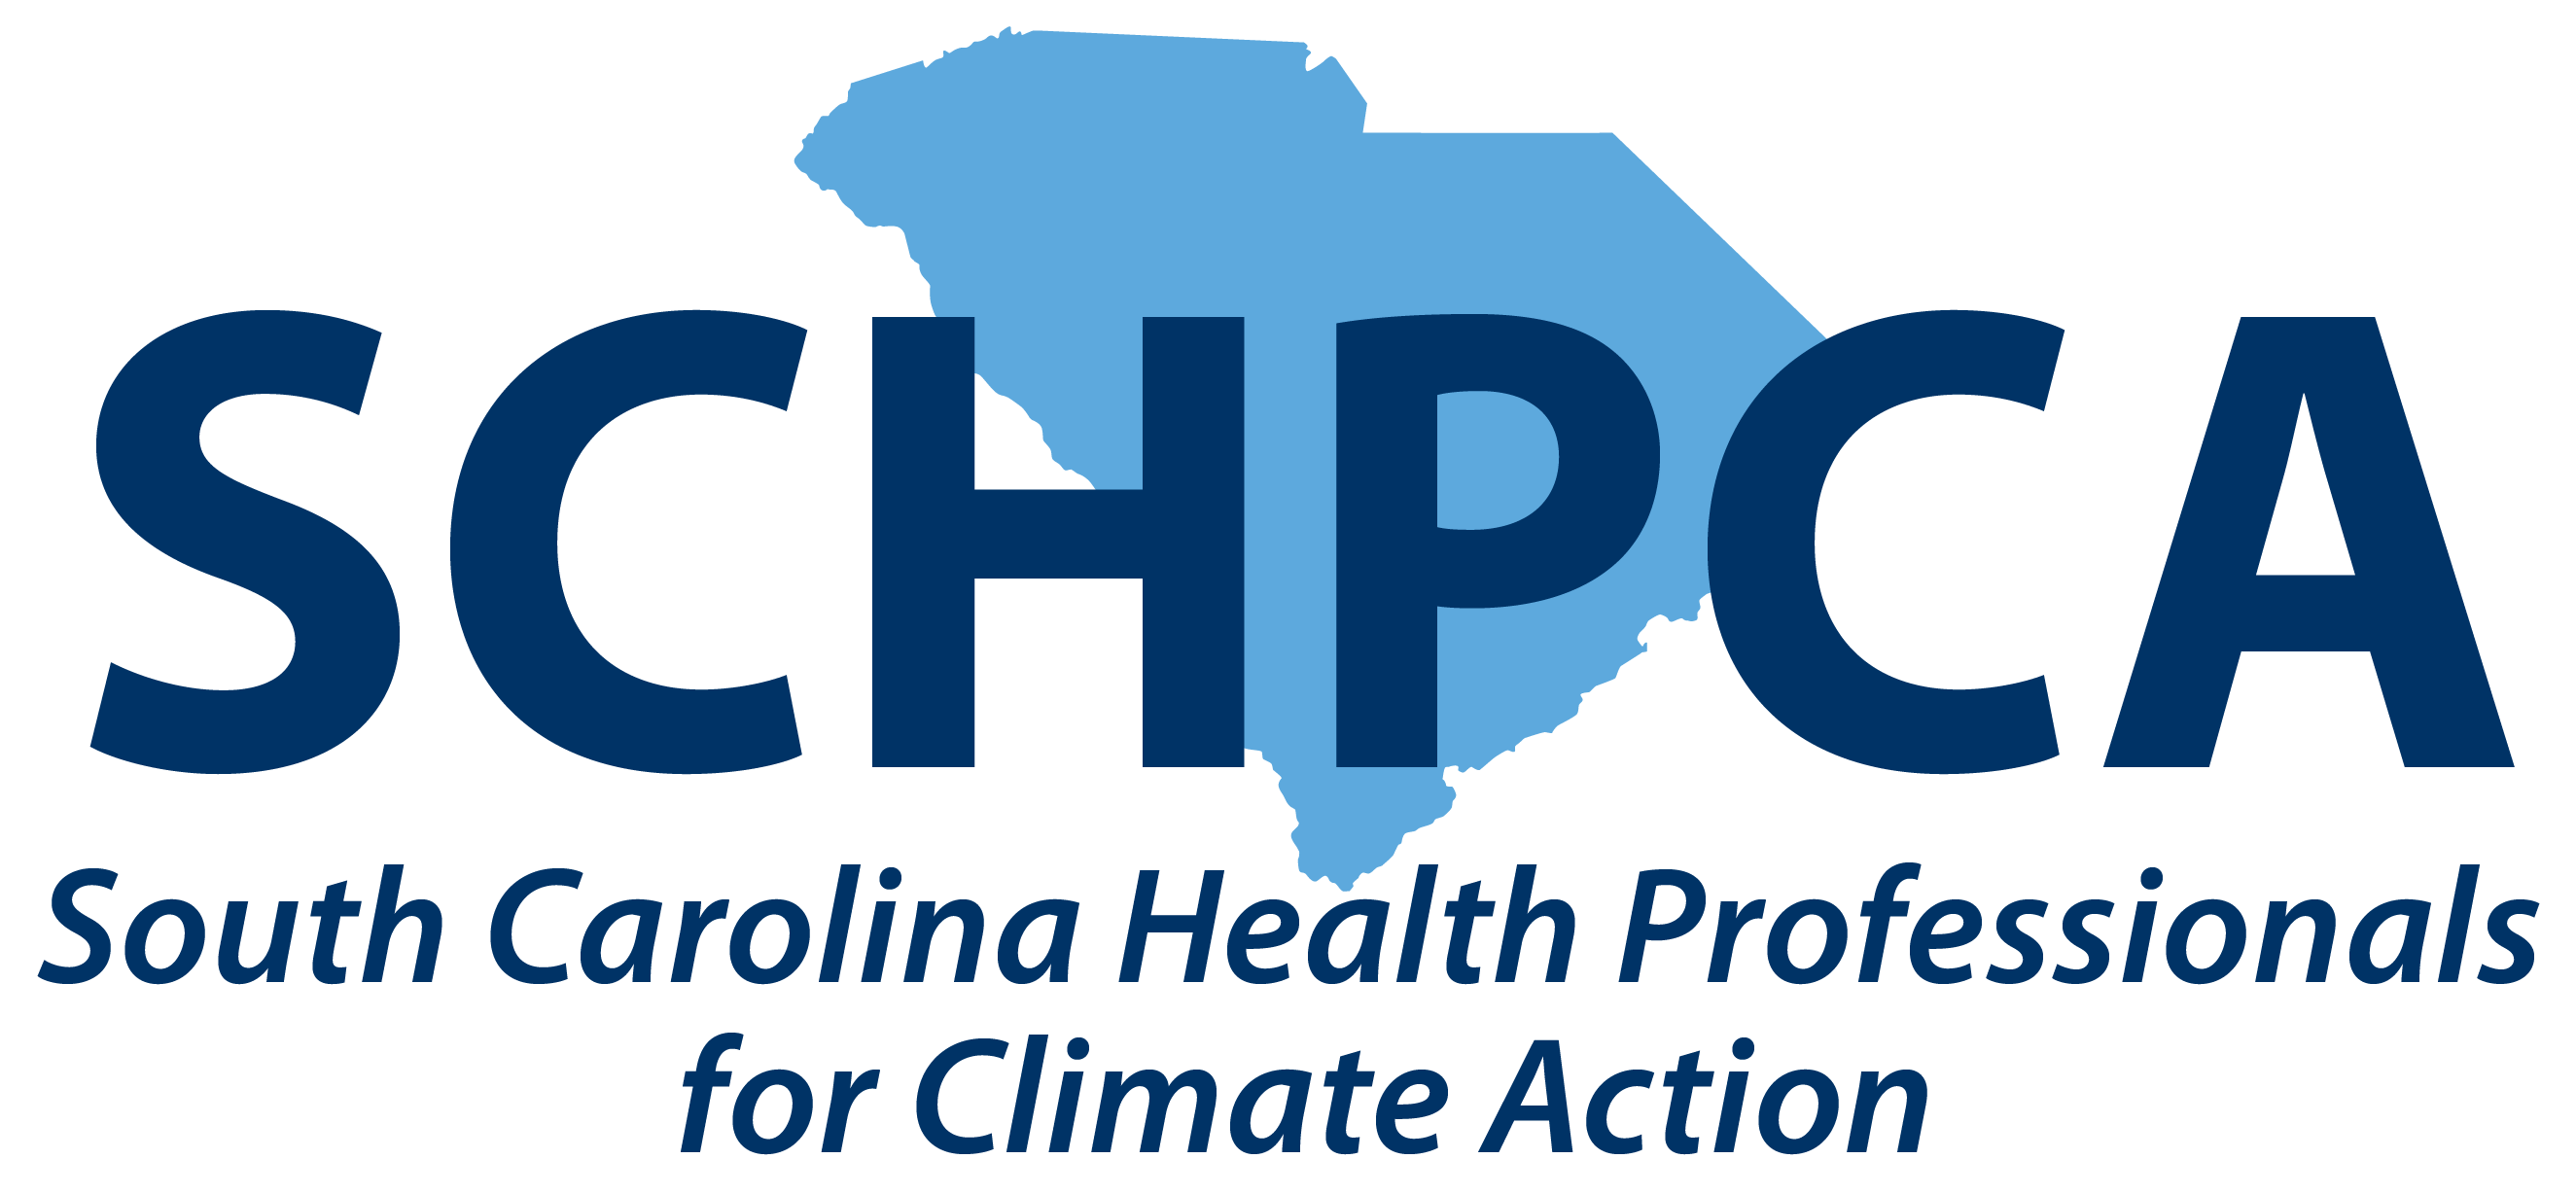 South Carolina Health Professionals for Climate Action